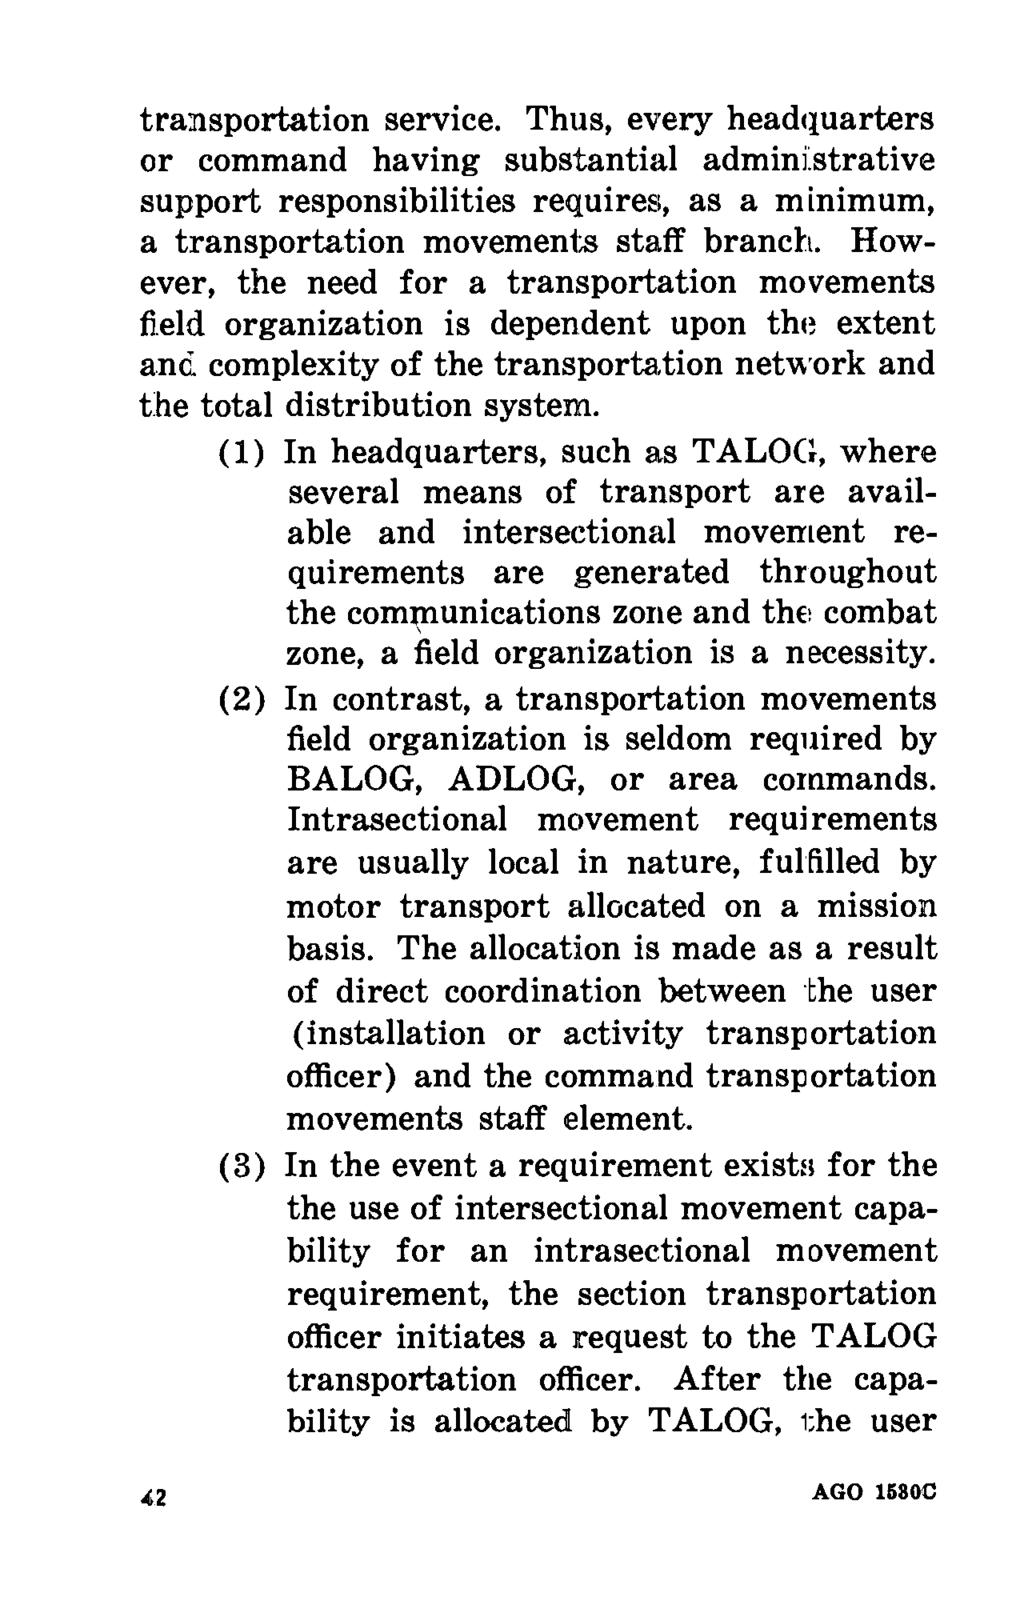 transportation service. Thus, every headquarters or command having substantial adminijstrative support responsibilities requires, as a minimum, a transportation movements staff branch.